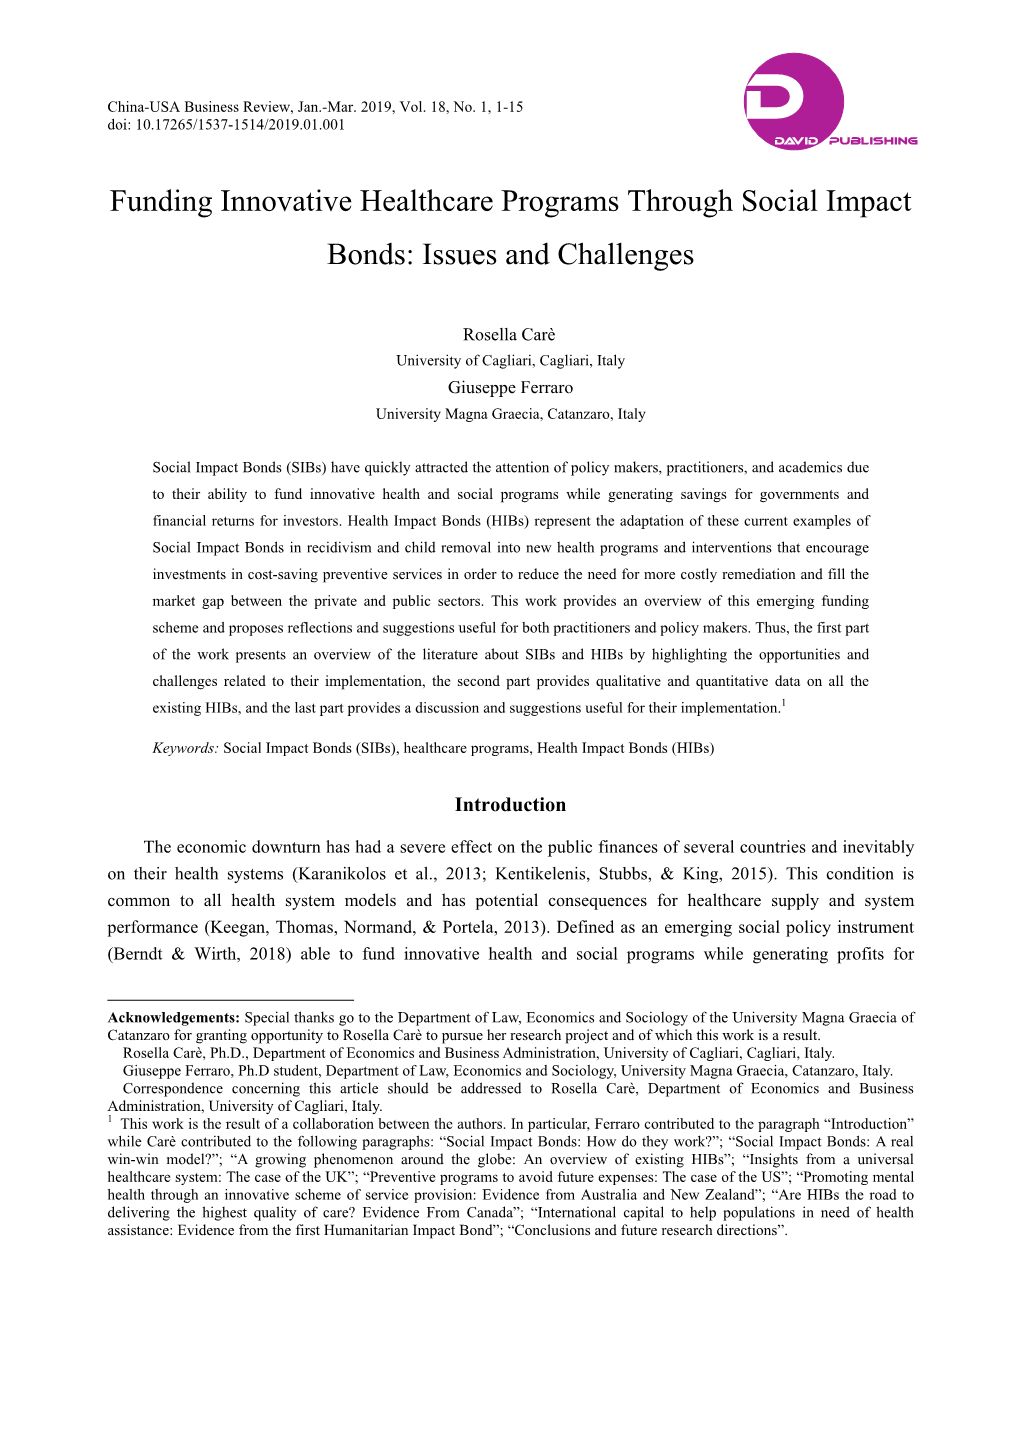 Funding Innovative Healthcare Programs Through Social Impact Bonds: Issues and Challenges